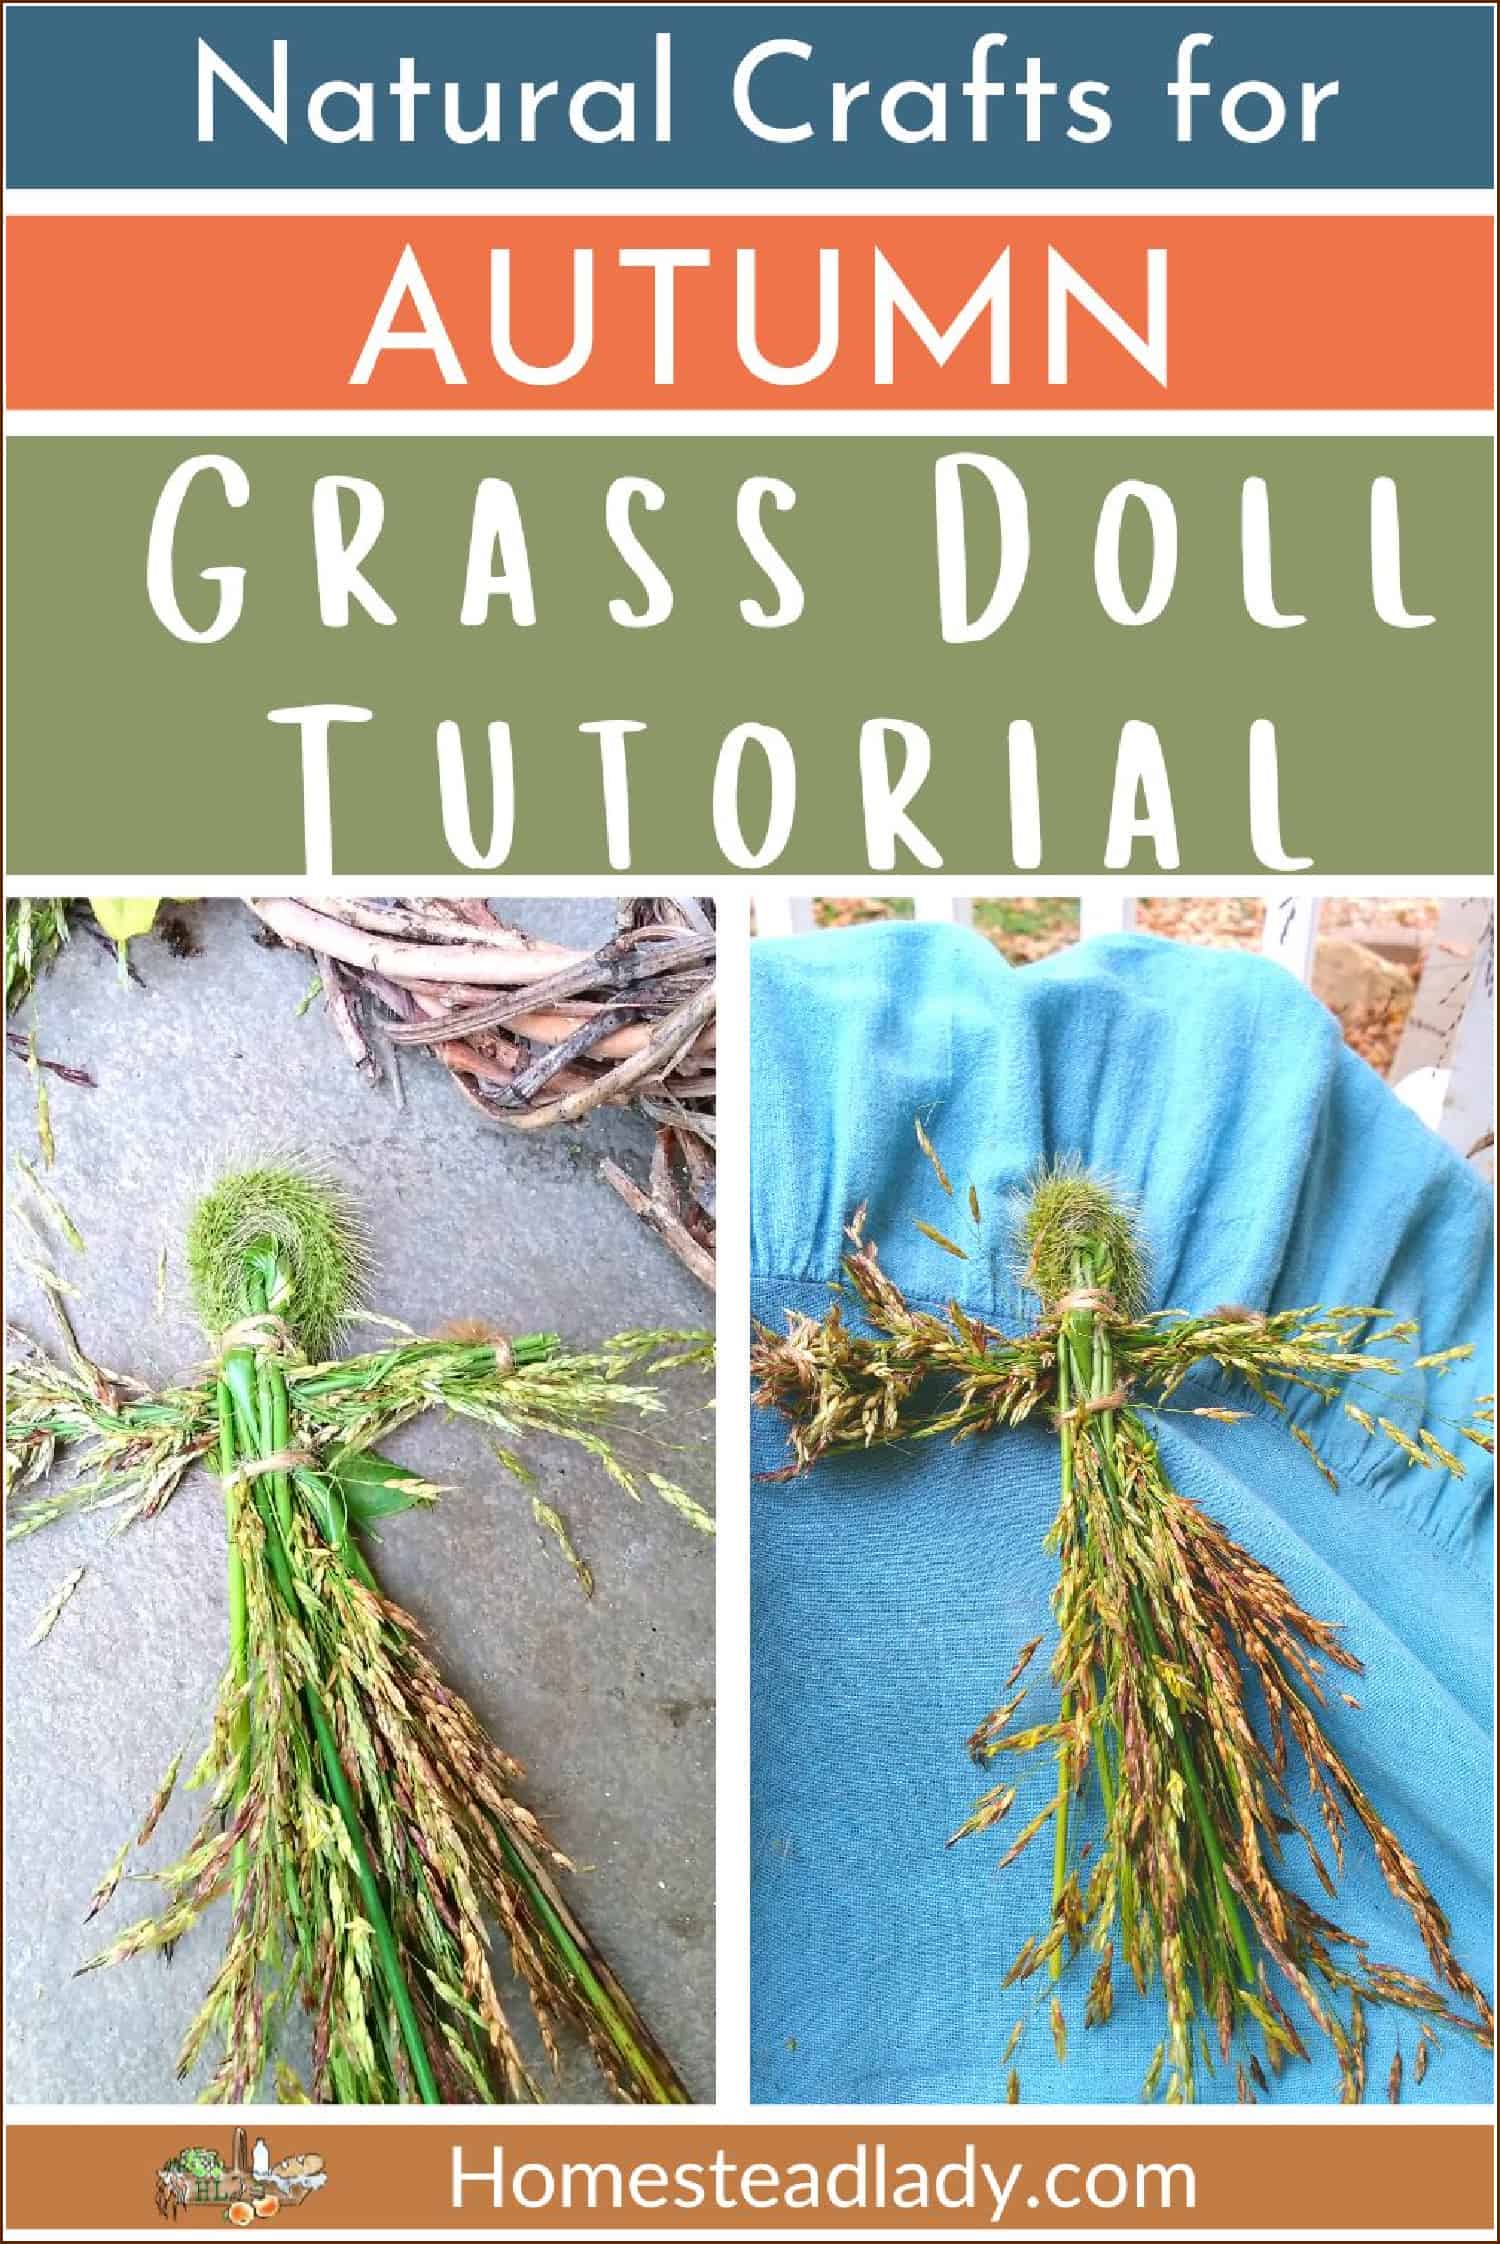 Natural Crafts for Autumn & a Grass Doll Tutorial • Homestead Lady